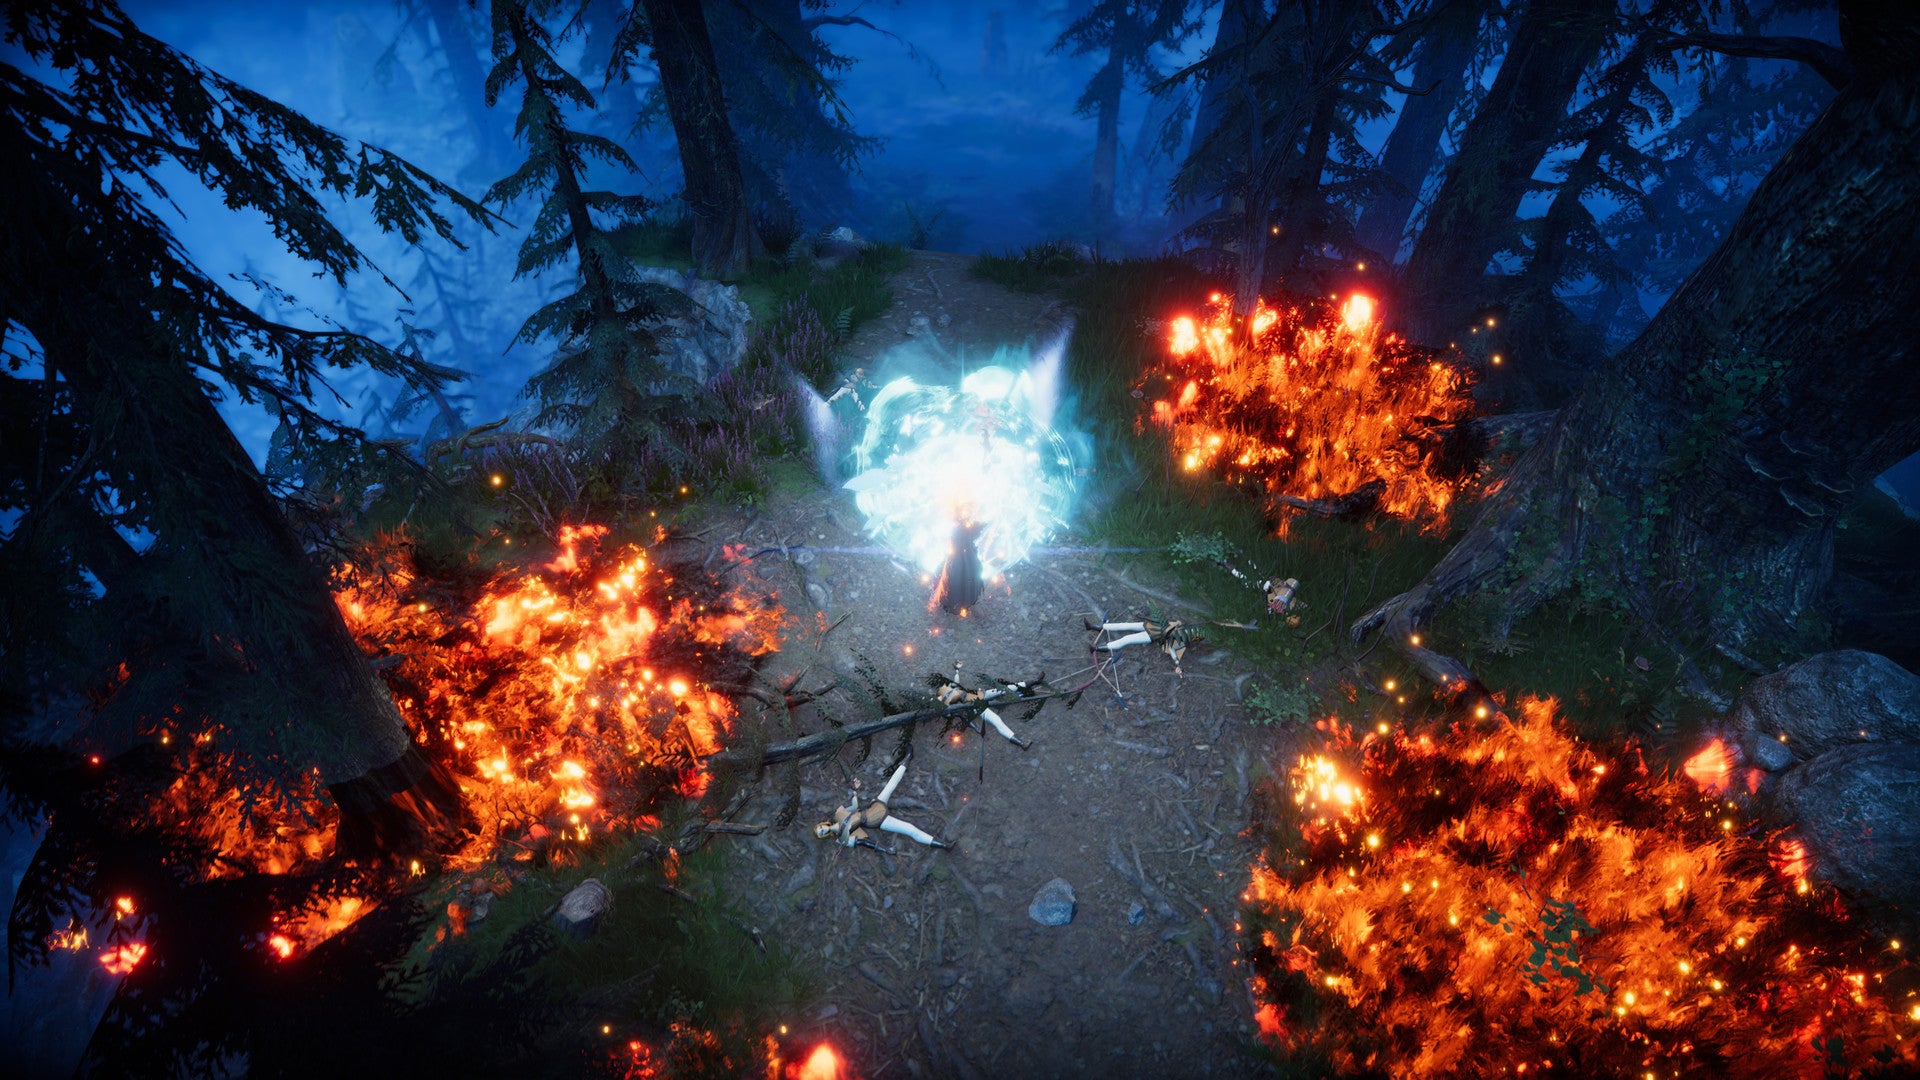 A vampire in V Rising casts a powerful spell while the woods around them burn.